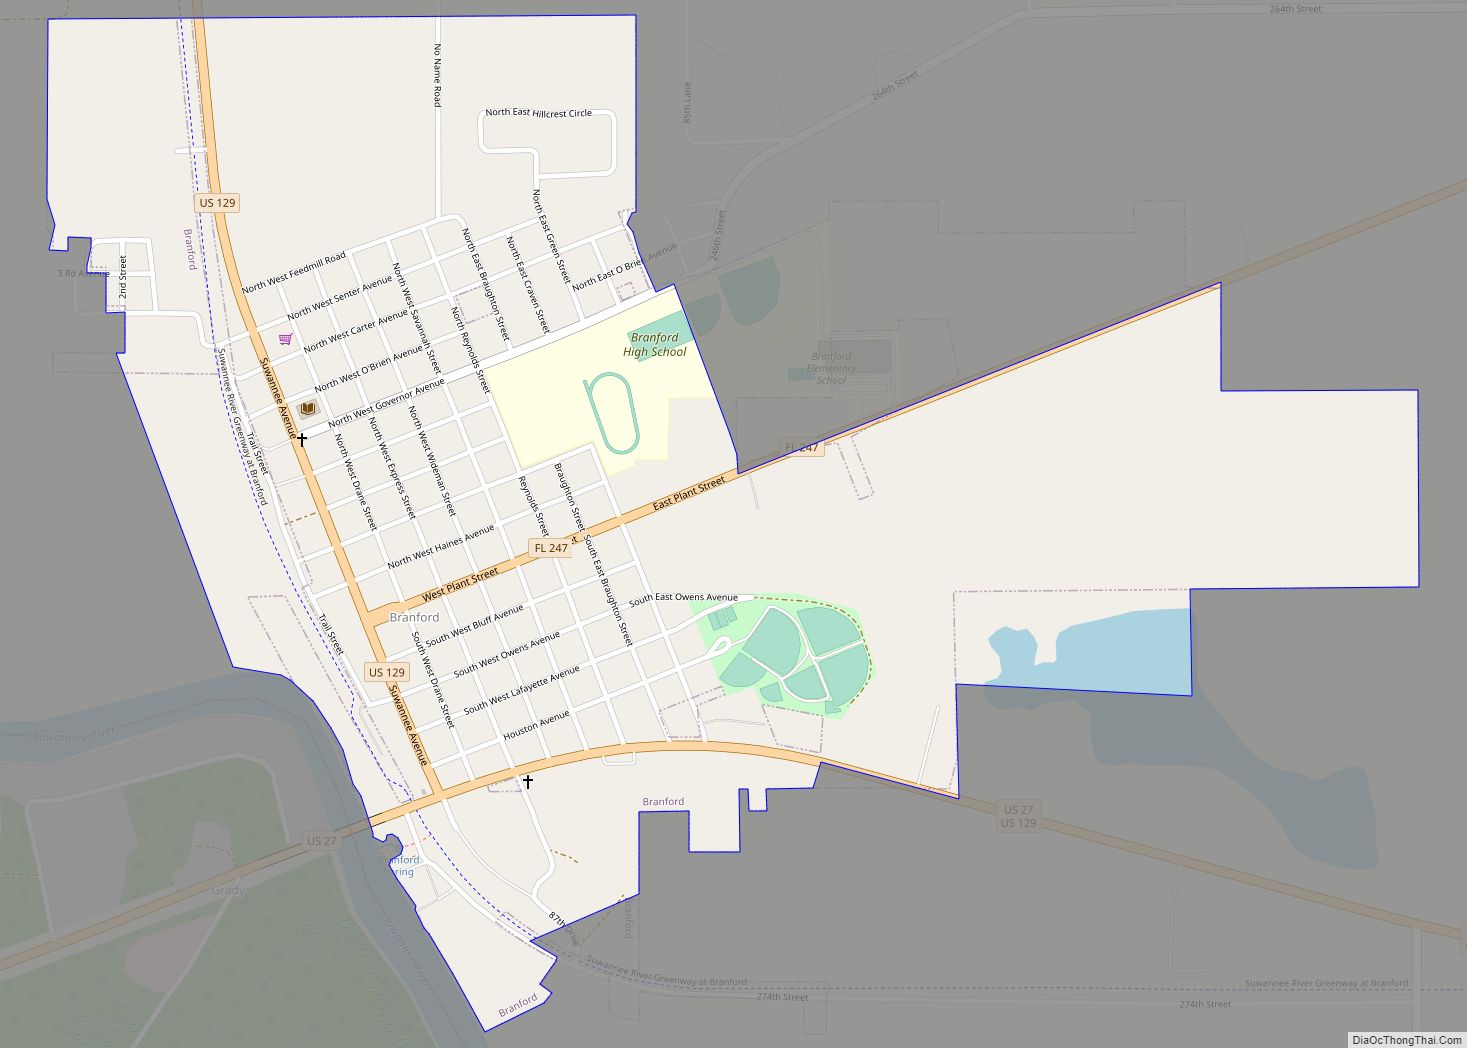 Map of Branford town